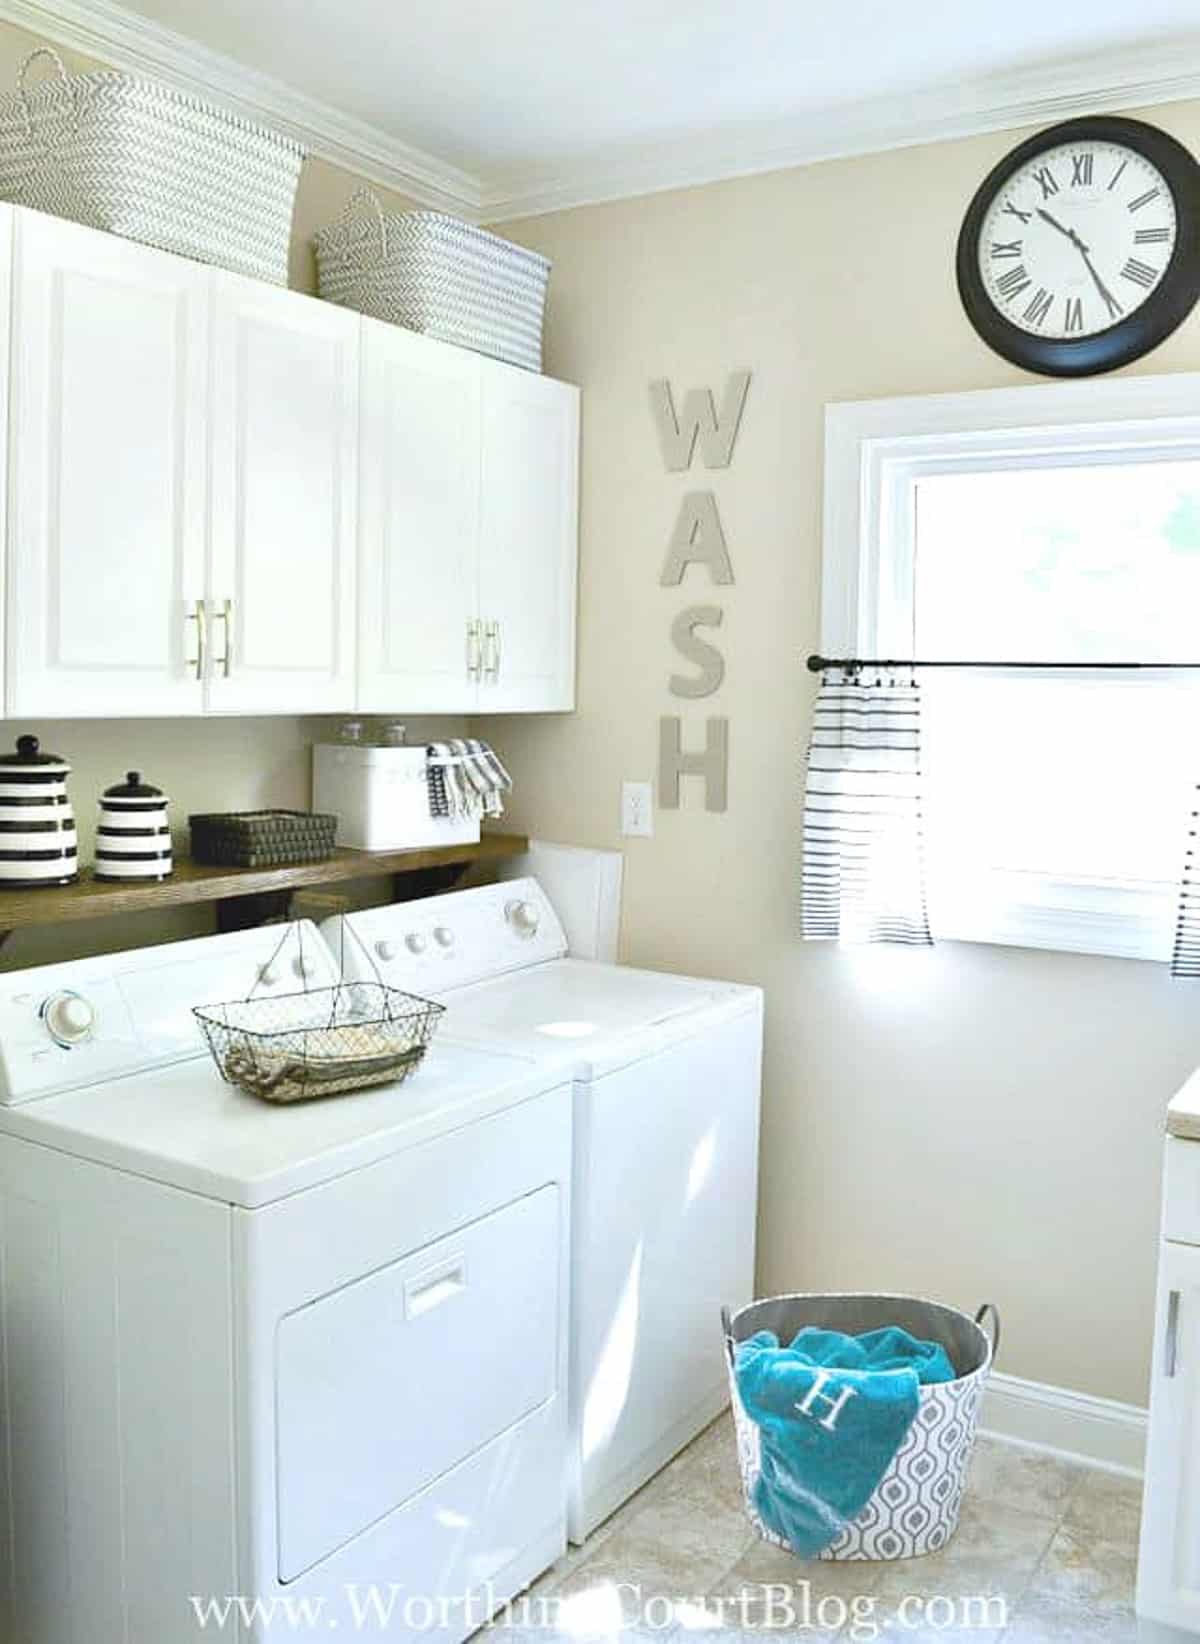 decorated laundry room with top loader washer and dryer with white cabinets above